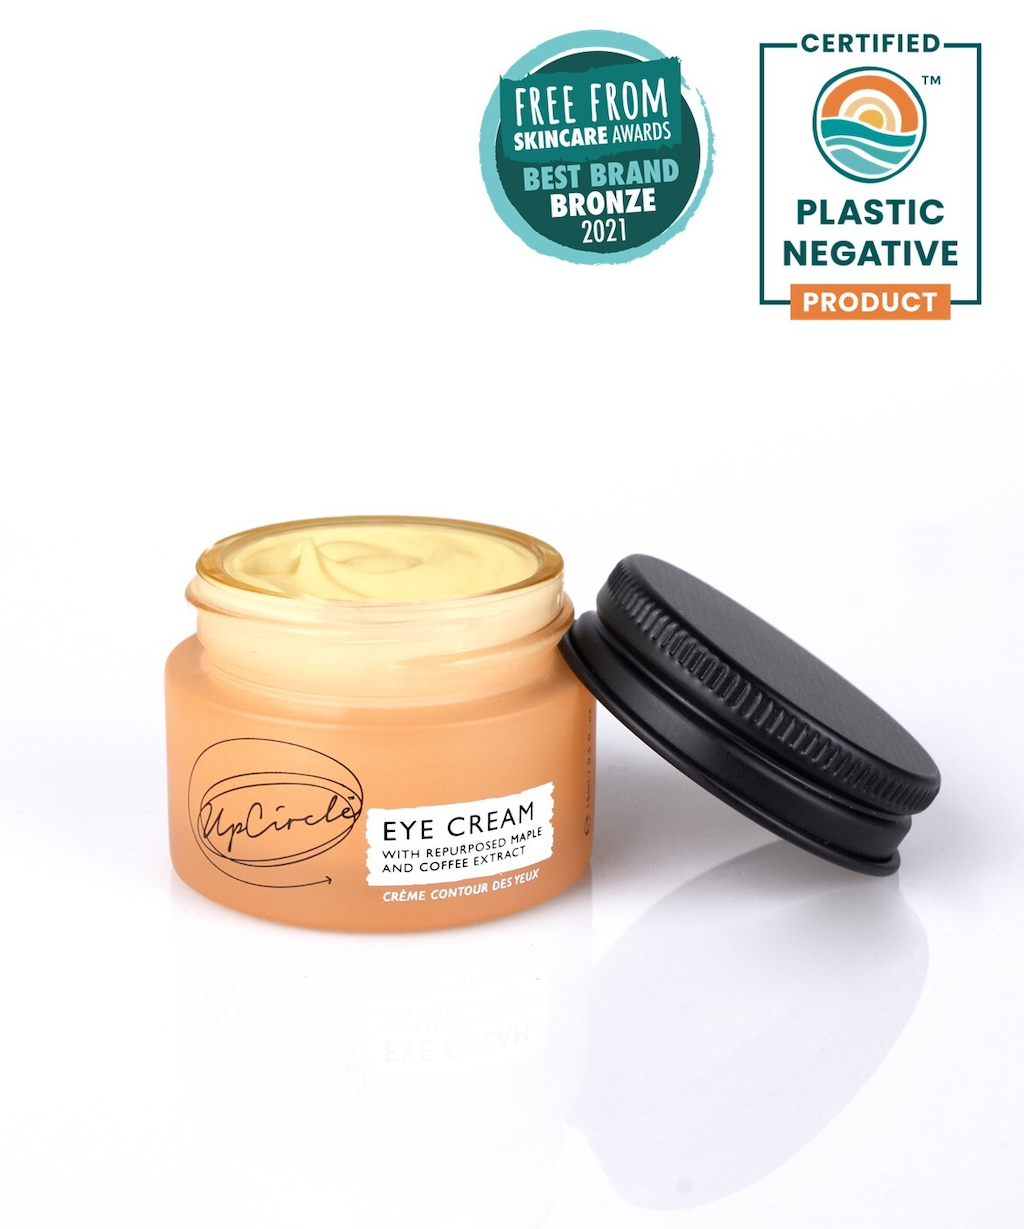 UpCircle Eye Cream. Natural eye cream. The orange jar with product is pictured open. A Free From Bronze award and a badge certifying the product as plastic negative are photo collaged on the image.